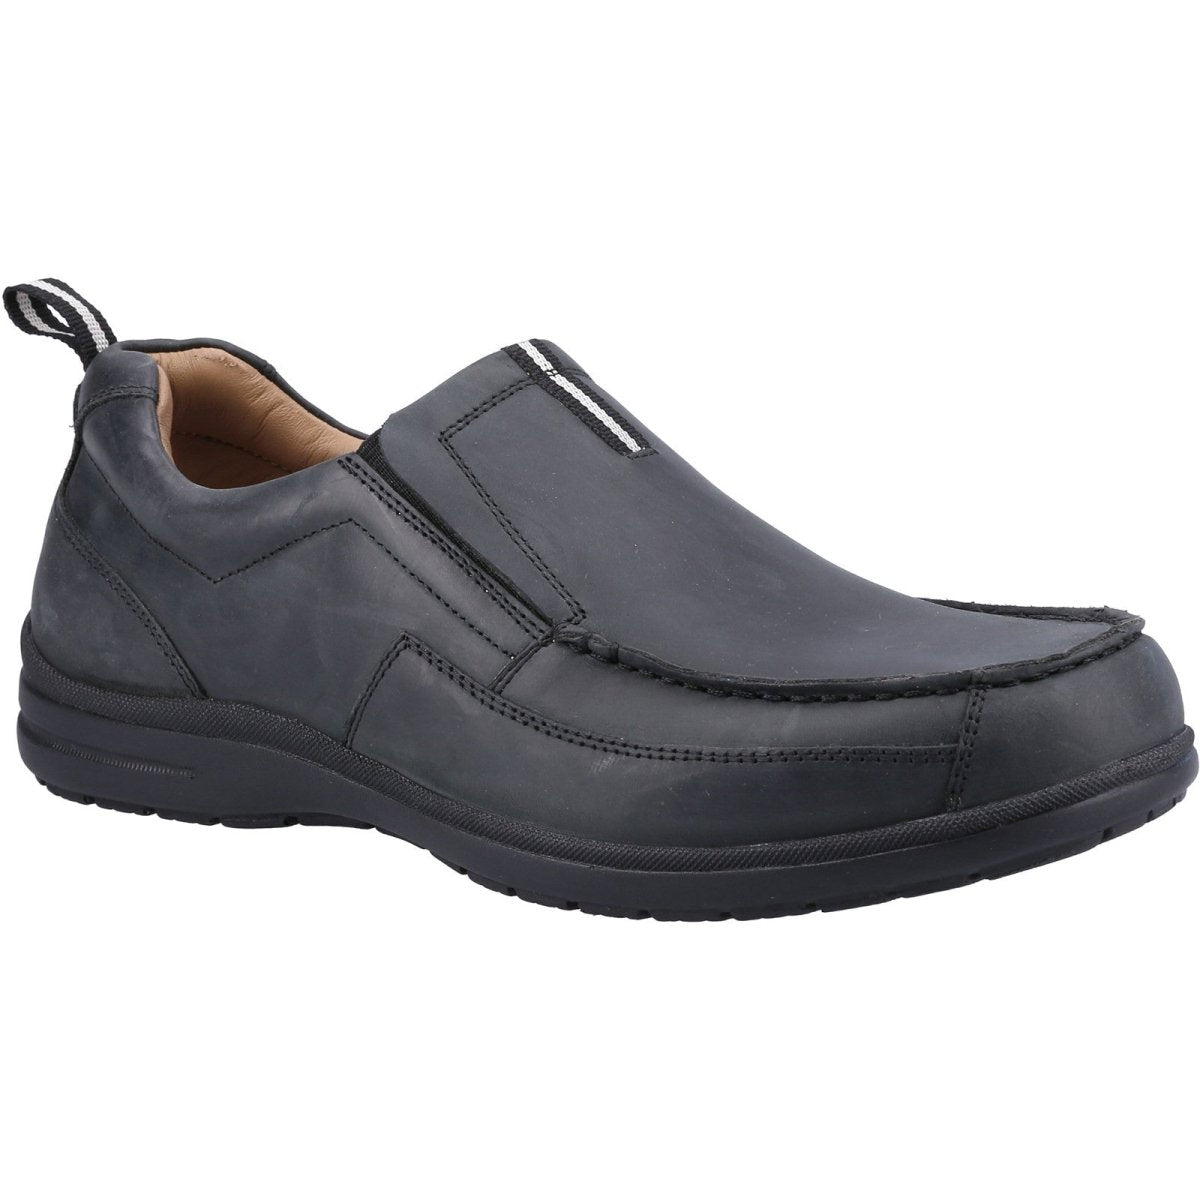 Fleet & Foster Paul Mens Leather Slip-On Casual Shoes - Shoe Store Direct